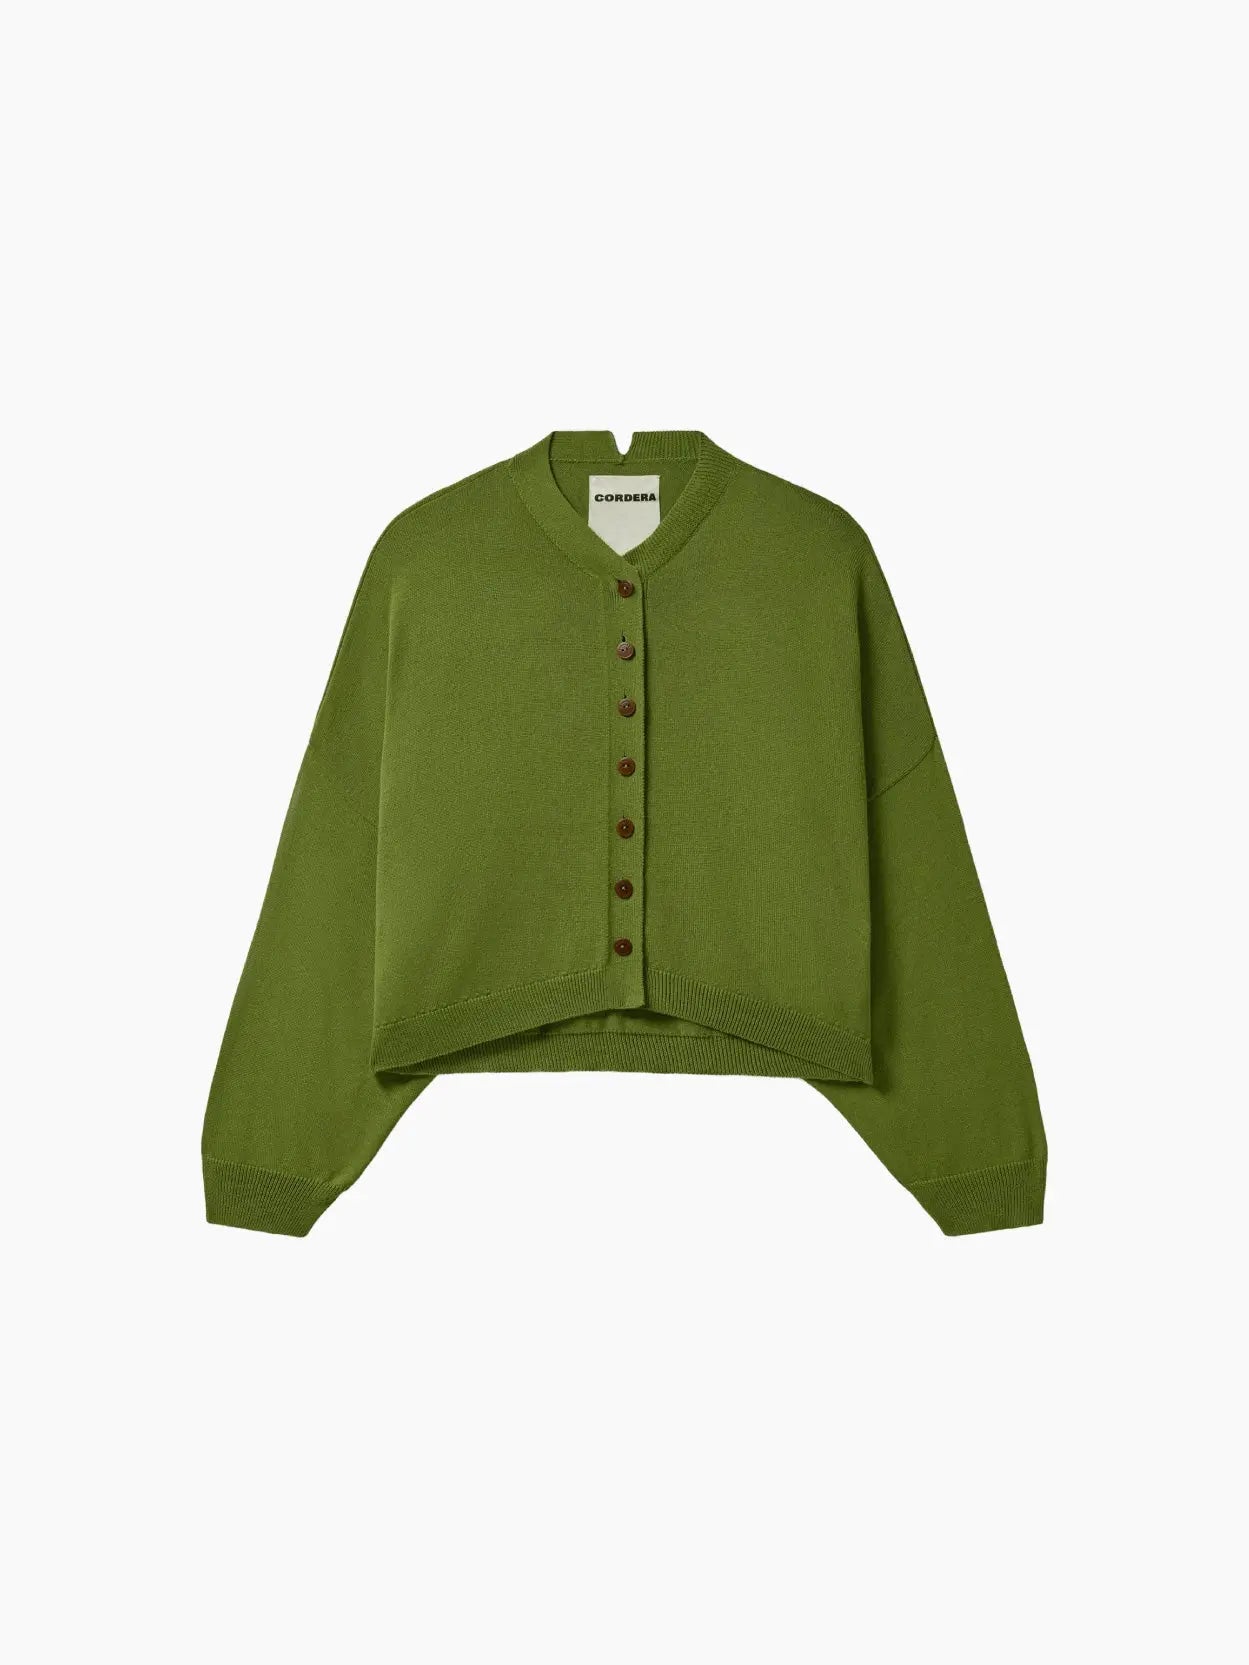 A green cropped cardigan with a V-neckline and brown buttons down the front is featured. The sleeves are long, and the fabric appears to be knit. The Cotton & Cashmere Cardigan Woodbine by cordera, available at Bassalstore Barcelona, has a label at the inner neckline. The background is white.